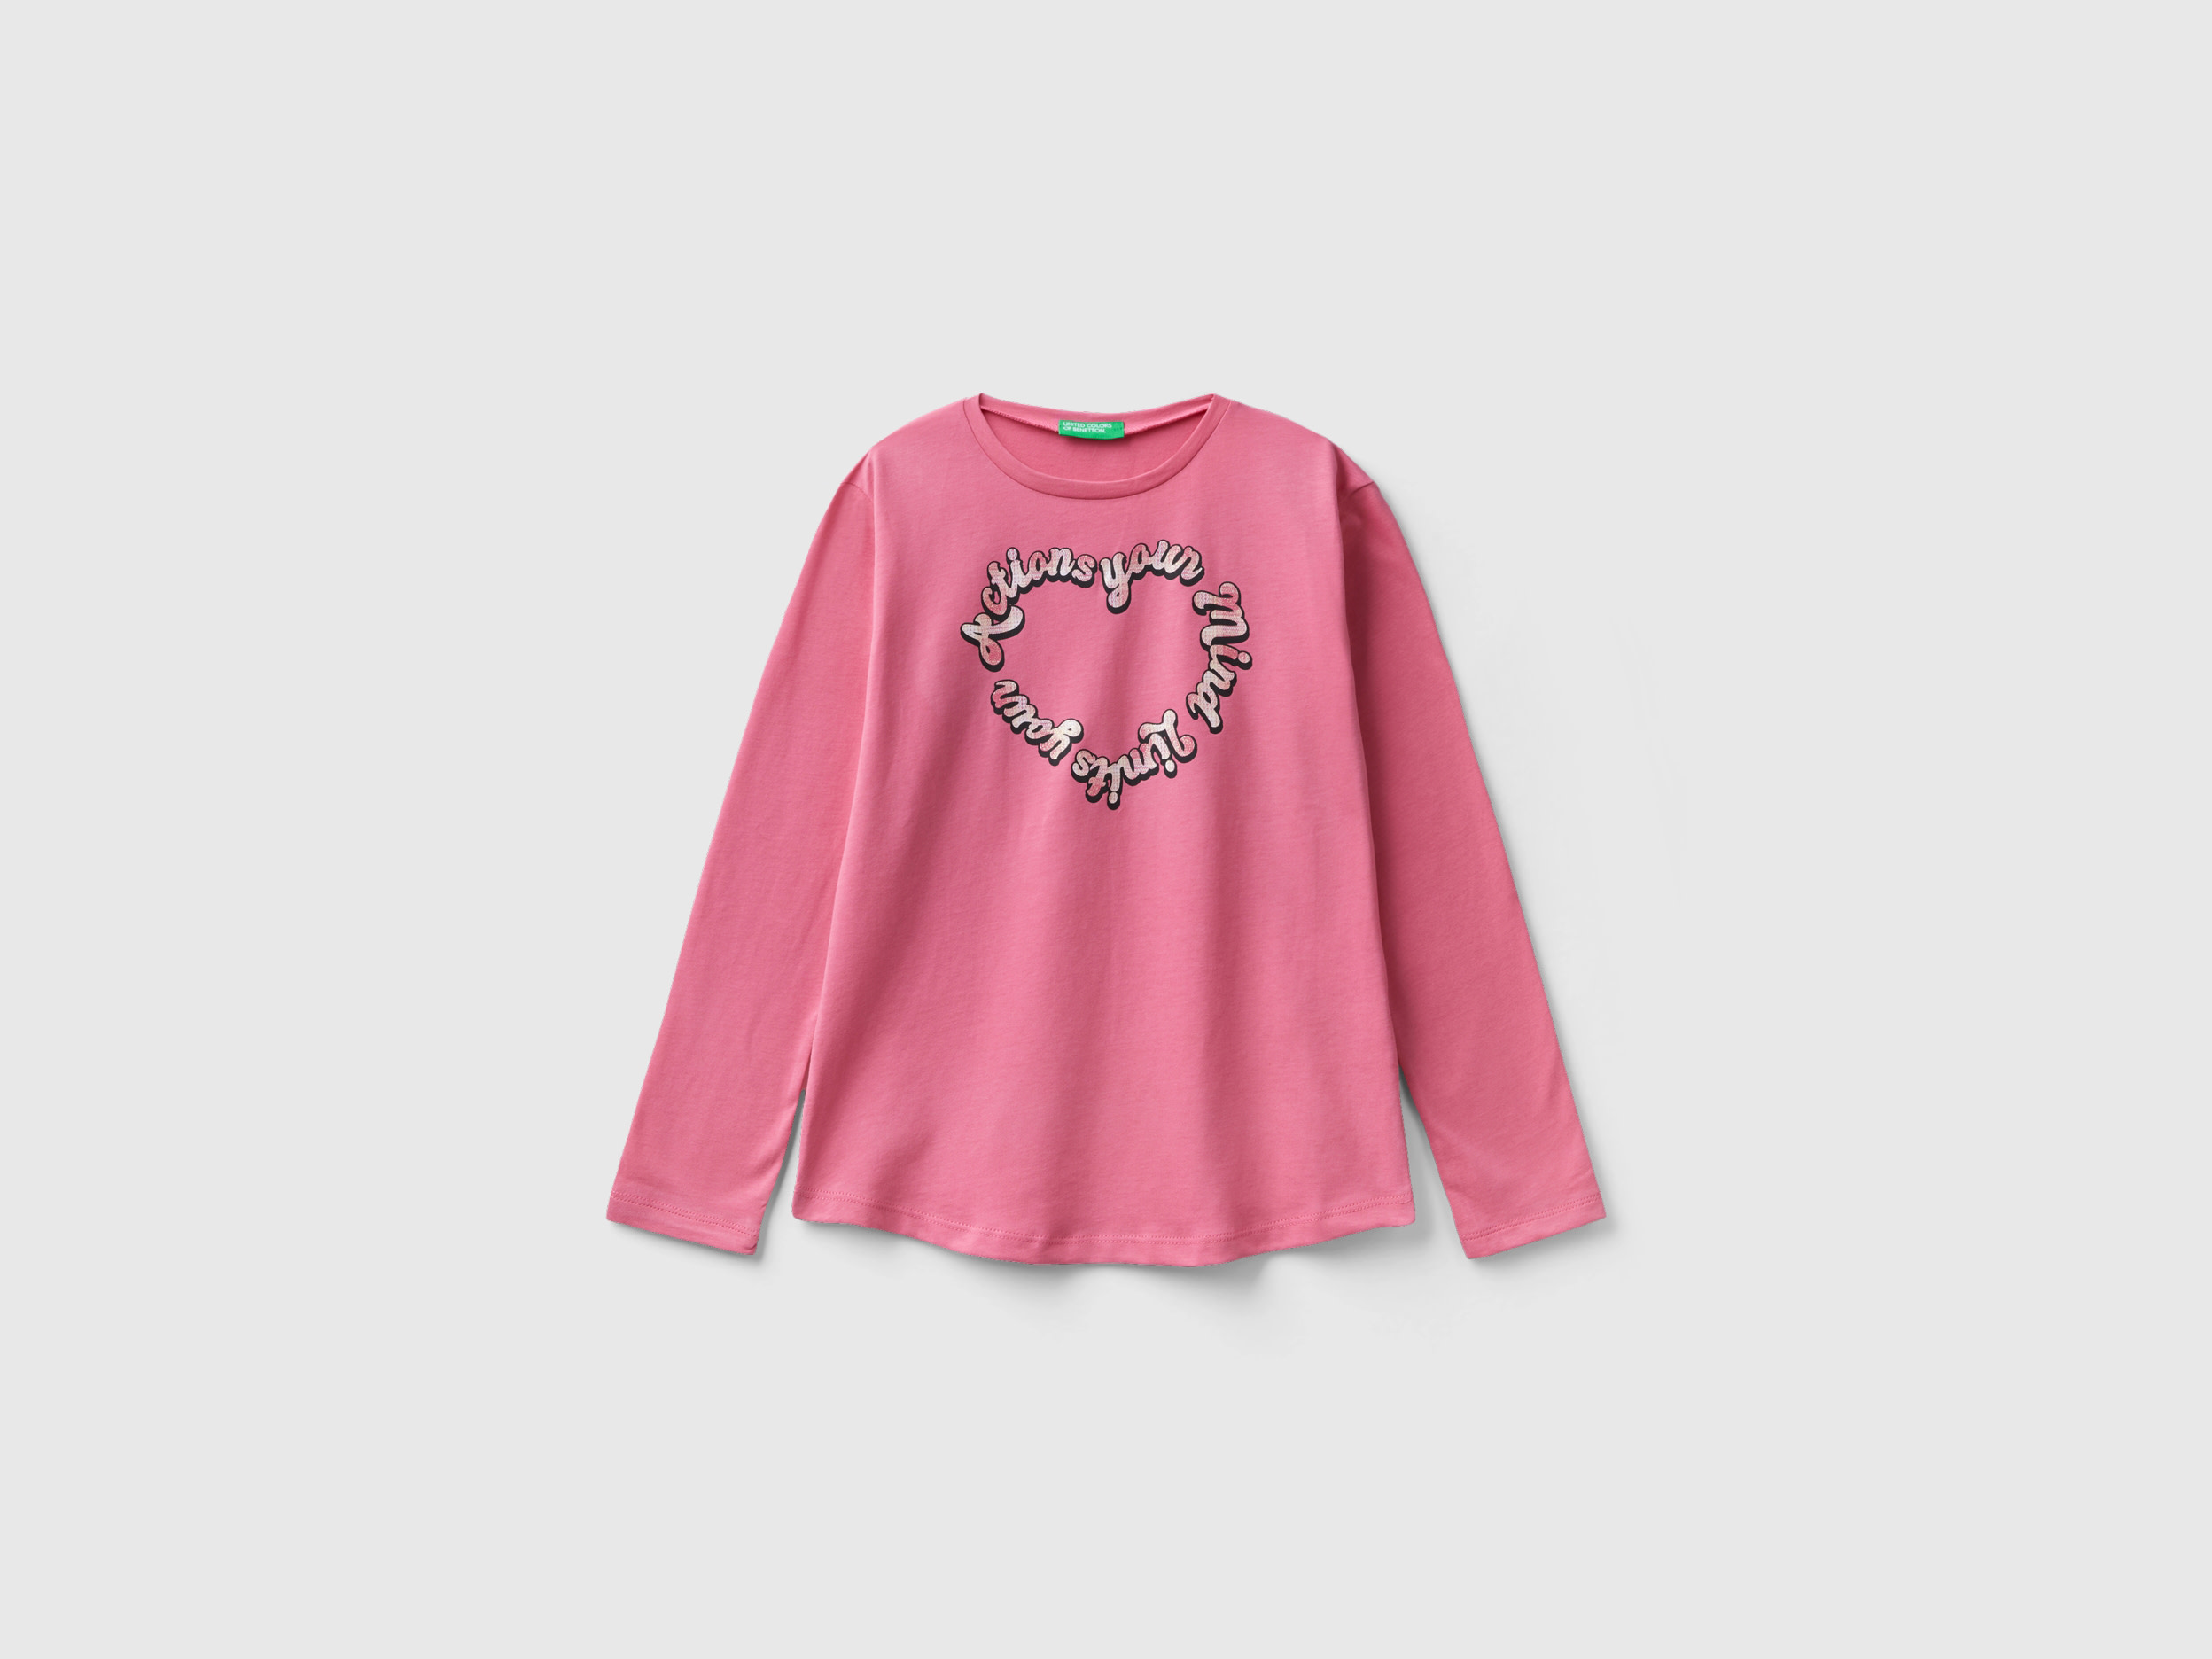 Benetton, Warm Cotton T-shirt With Glittery Print, size S, Pink, Kids